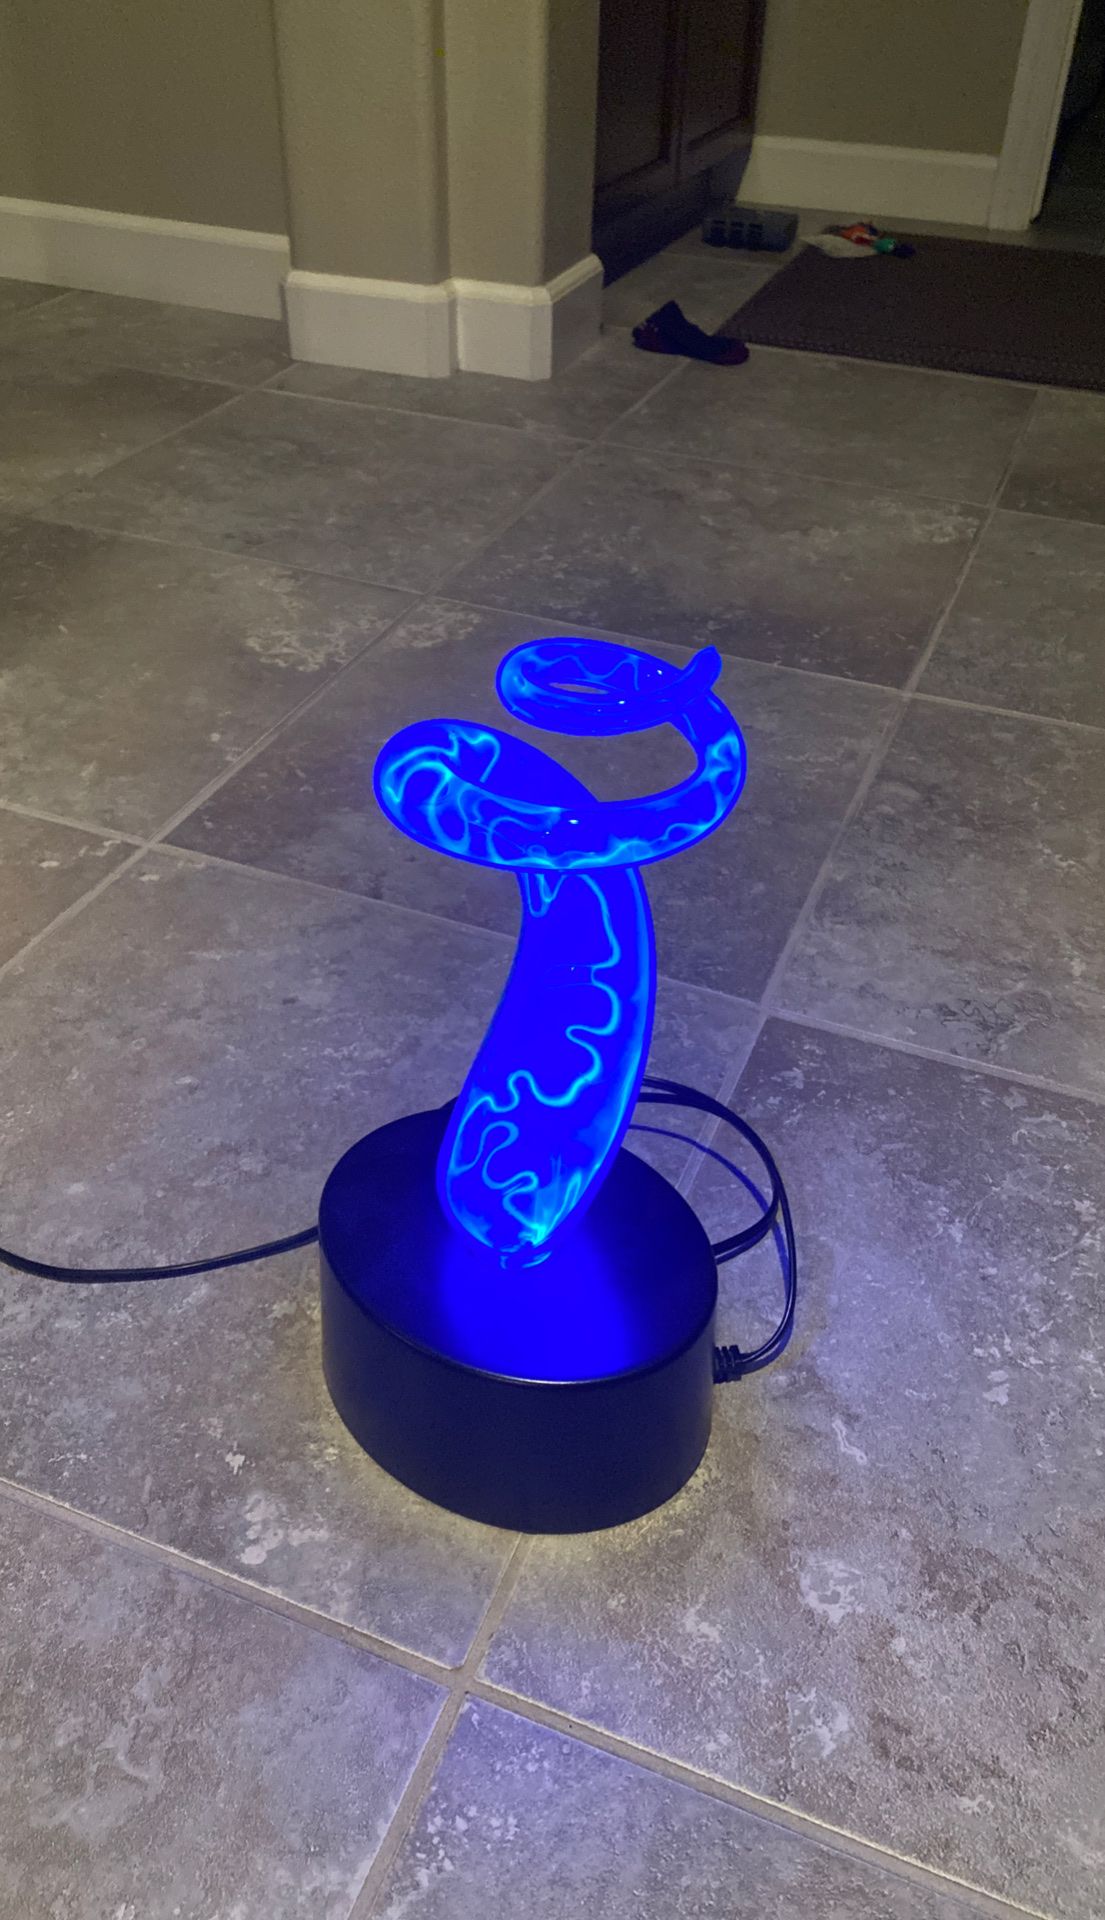 Blue lamp - swirling arc - touch sensitive